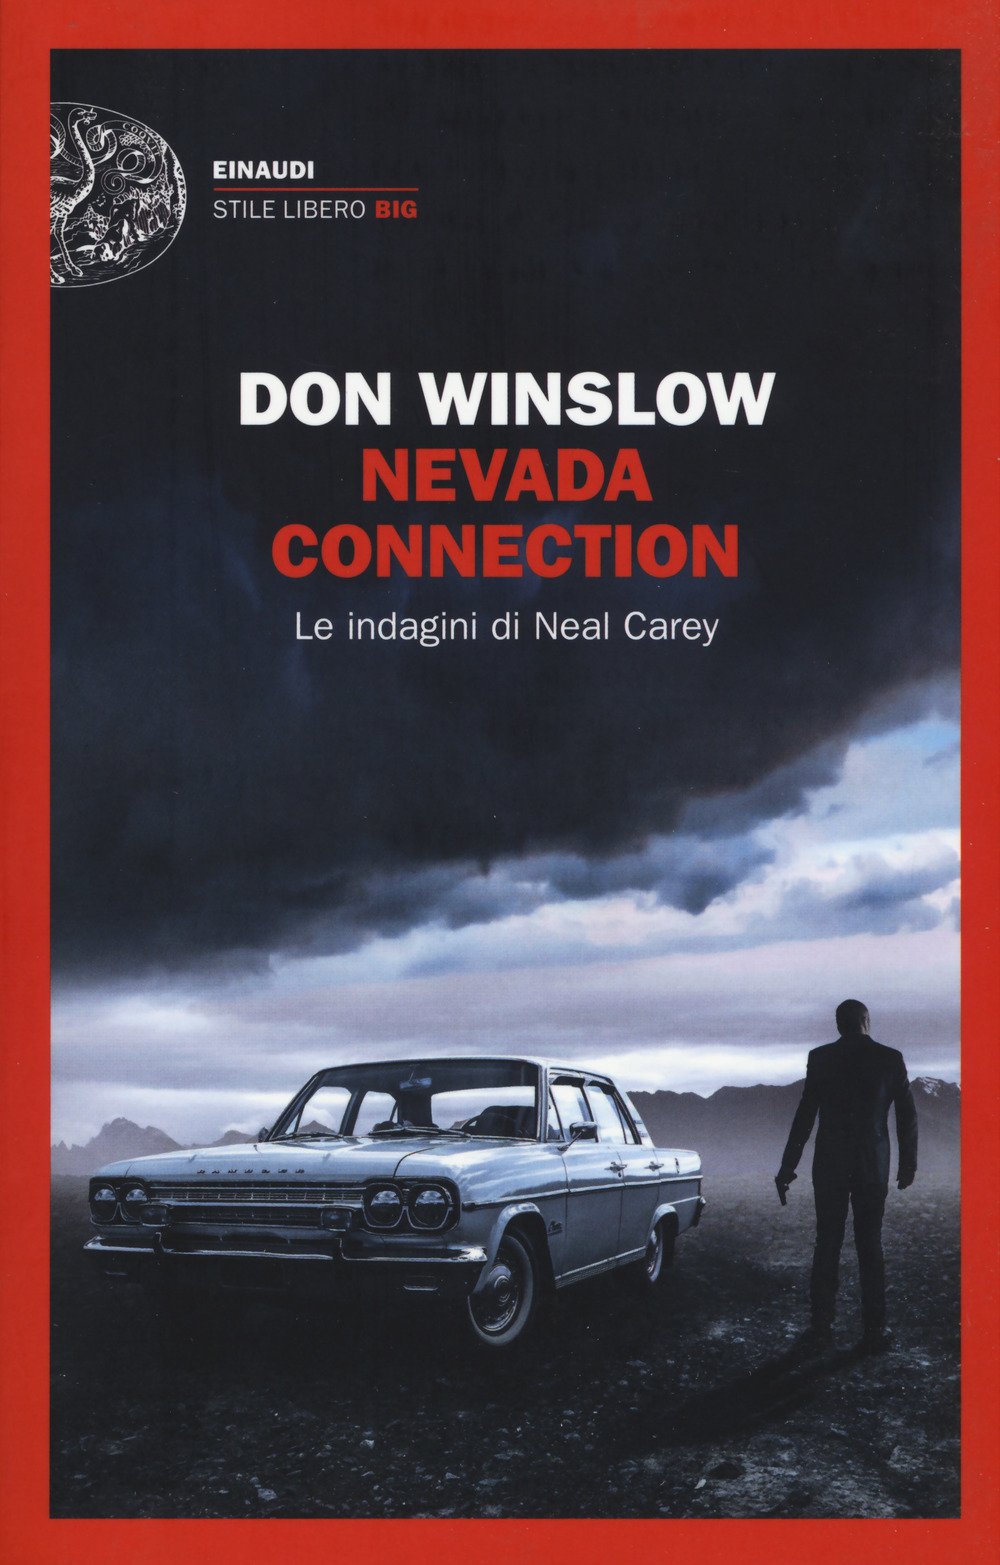 Nevada Connection by Don Winslow